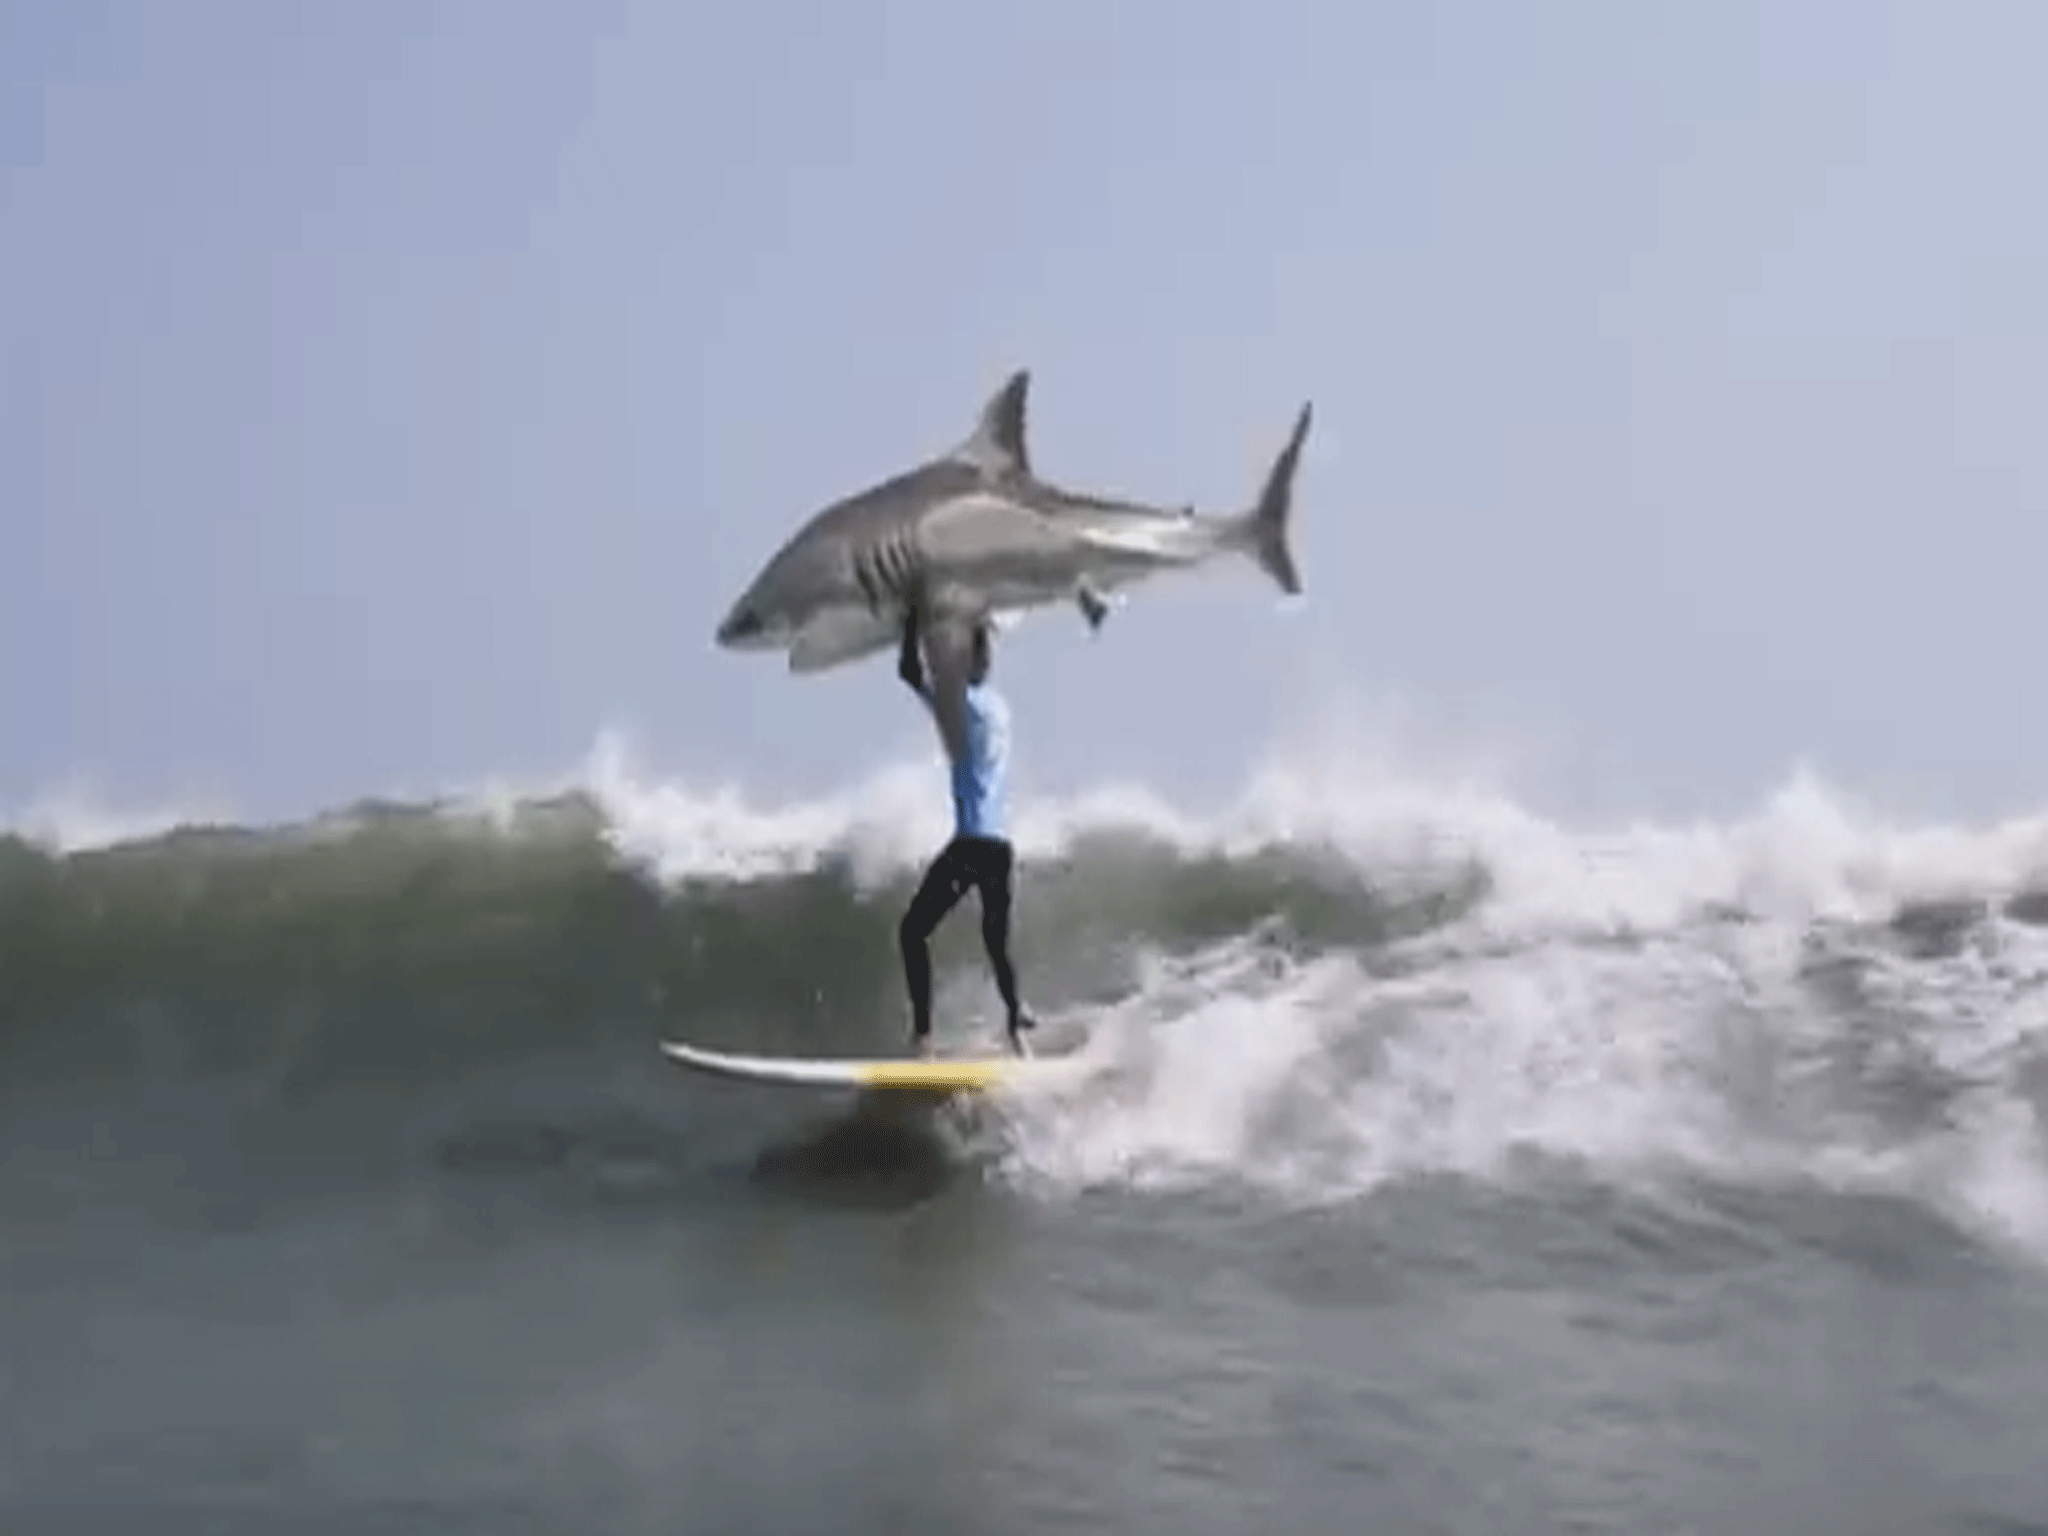 Suddenly the surfer appears on a perfect wave, unharmed and holding the shark above his head